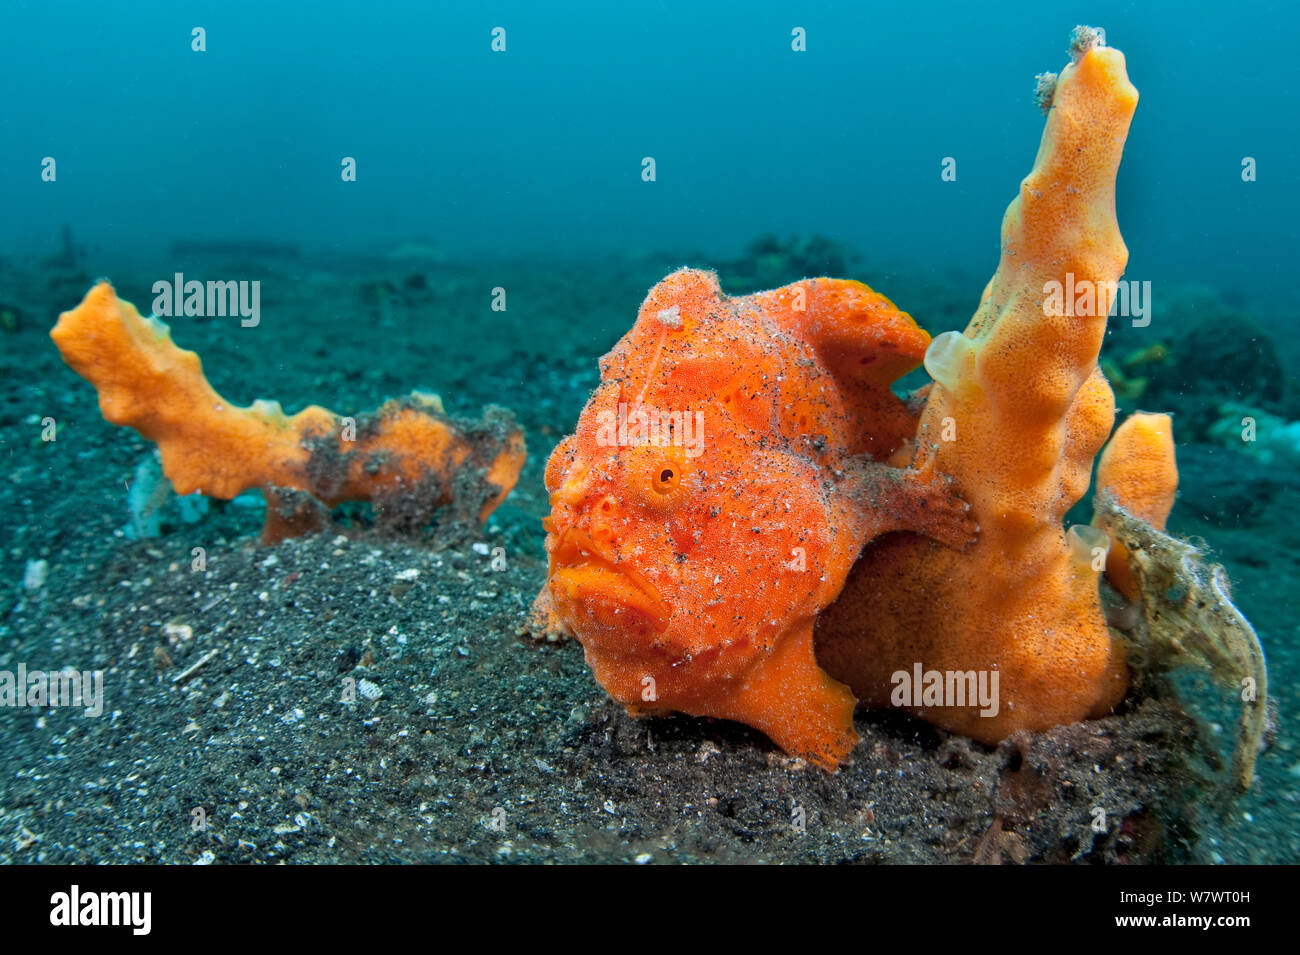 Golf-ball sized Painted frogfish (Antennarius pictus) waits to ambush prey disguised as an orange sponge. Bitung, North Sulawesi, Indonesia. Lembeh Strait, Molucca Sea. Stock Photo